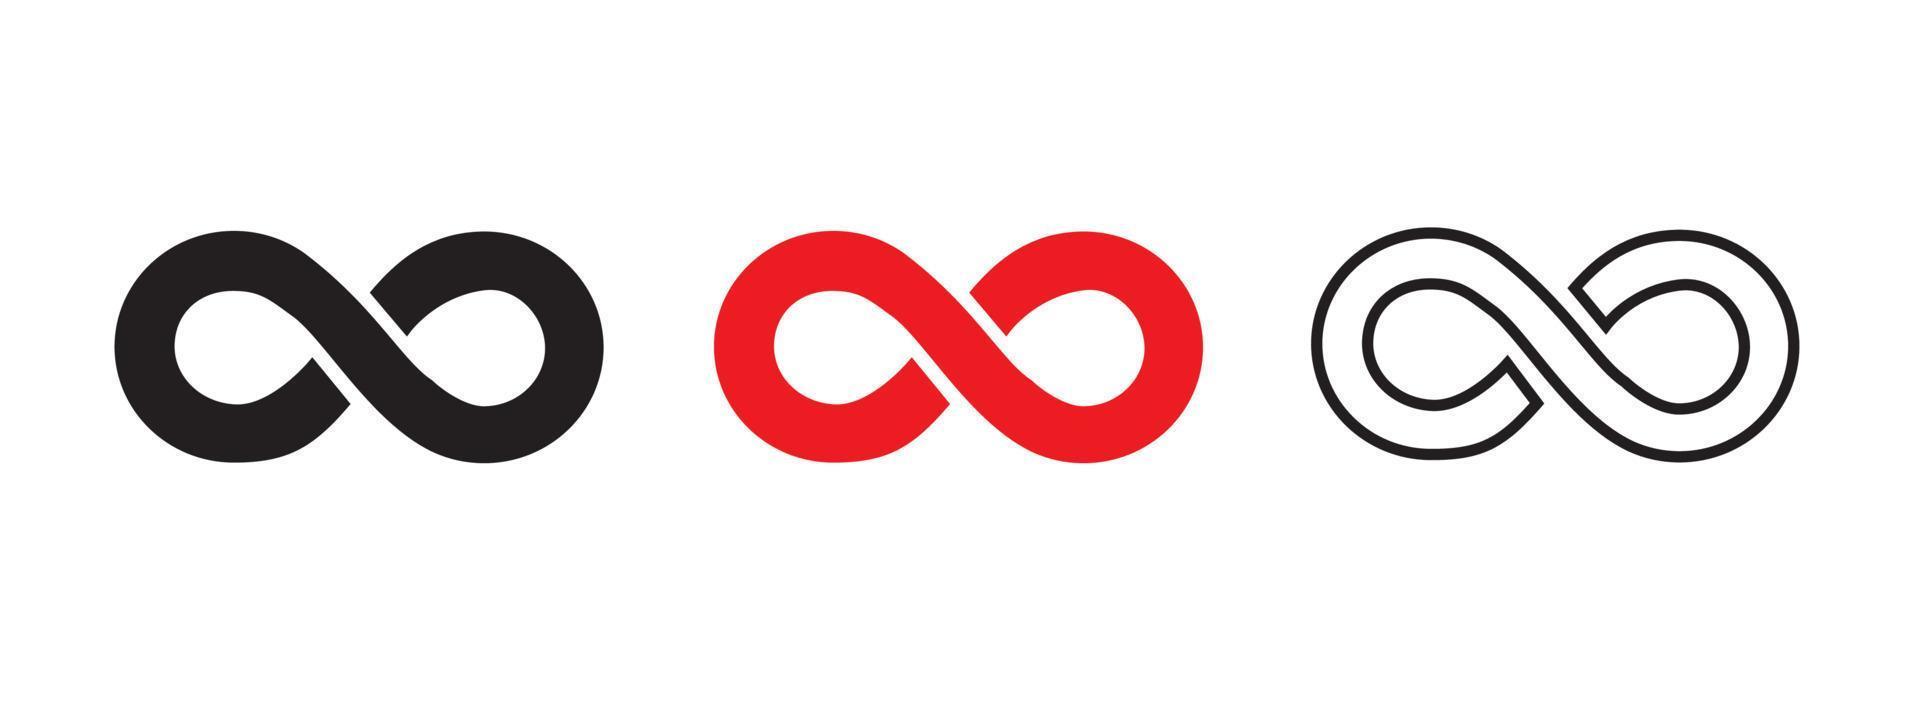 Infinity symbol black, simple with discontinuation, isolated vector